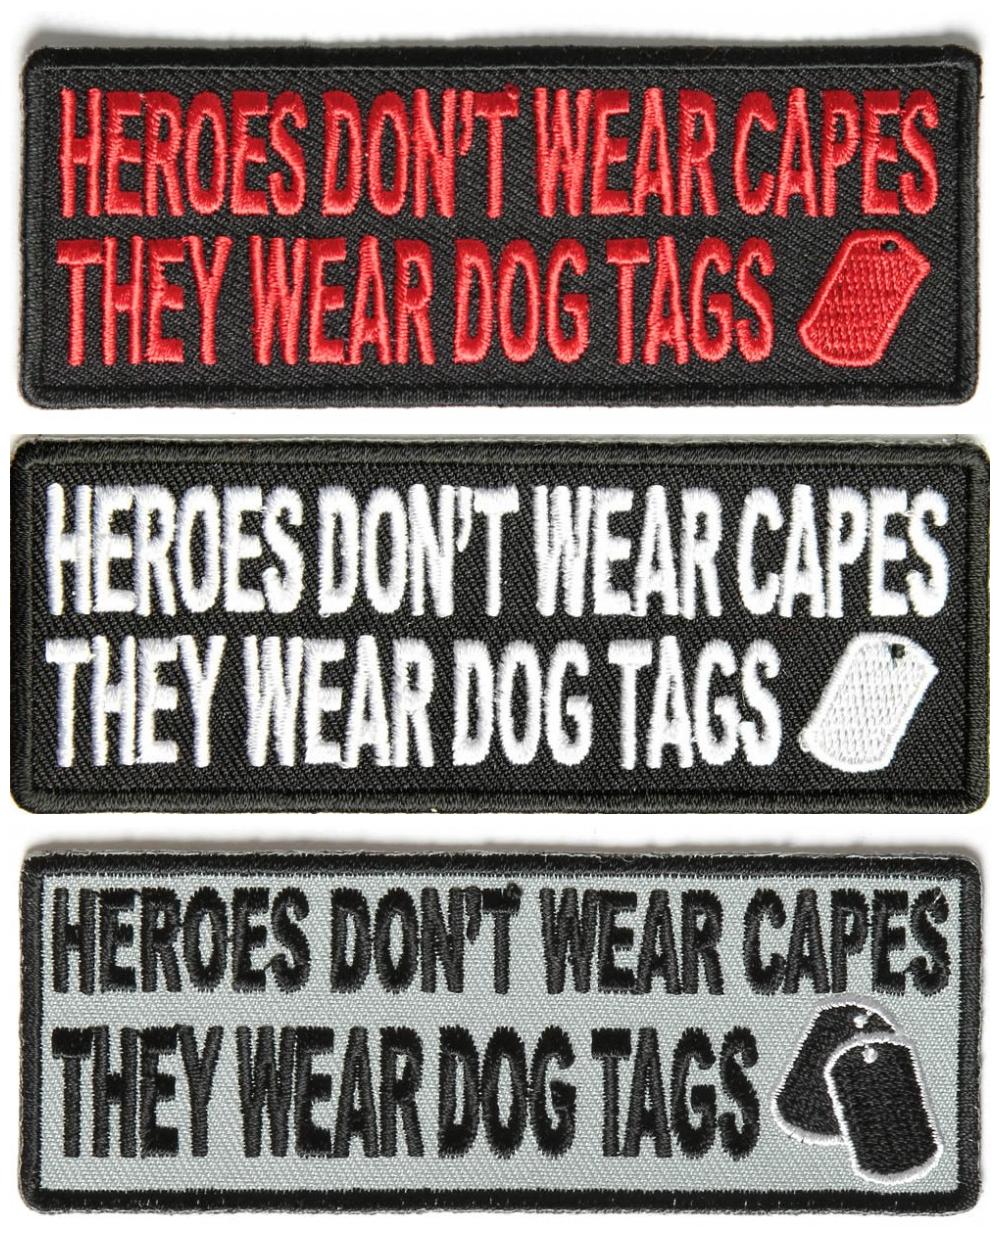 Heroes Don't Wear Capes They Wear Dog Tags PATCHES | Vet Patches